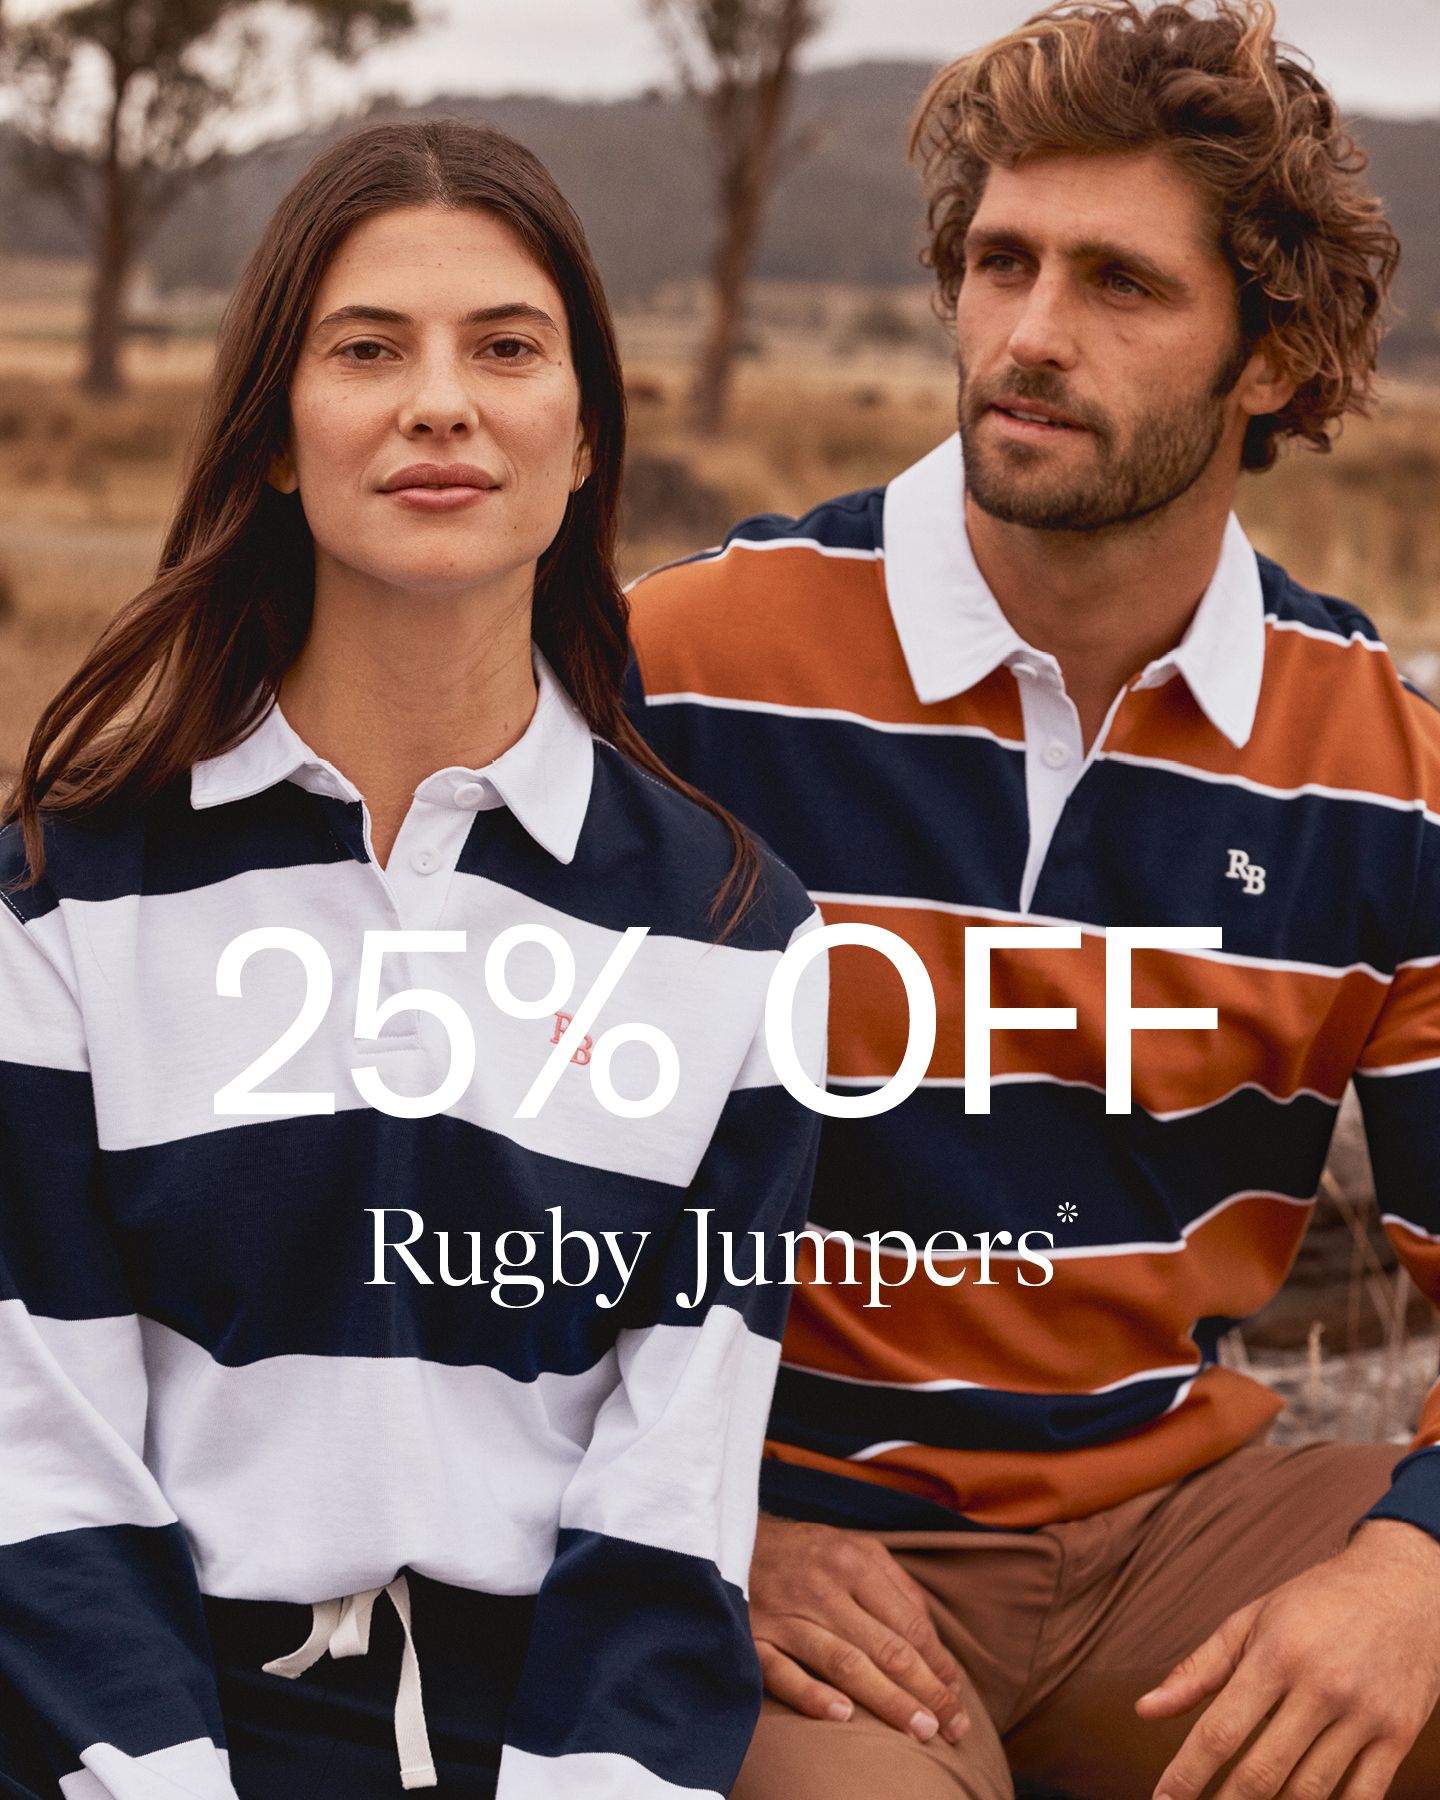 25% off Rugby Jumpers*

Stay on top of the game with 25% off our...

Shop via the link in bio. 

#RBSellars